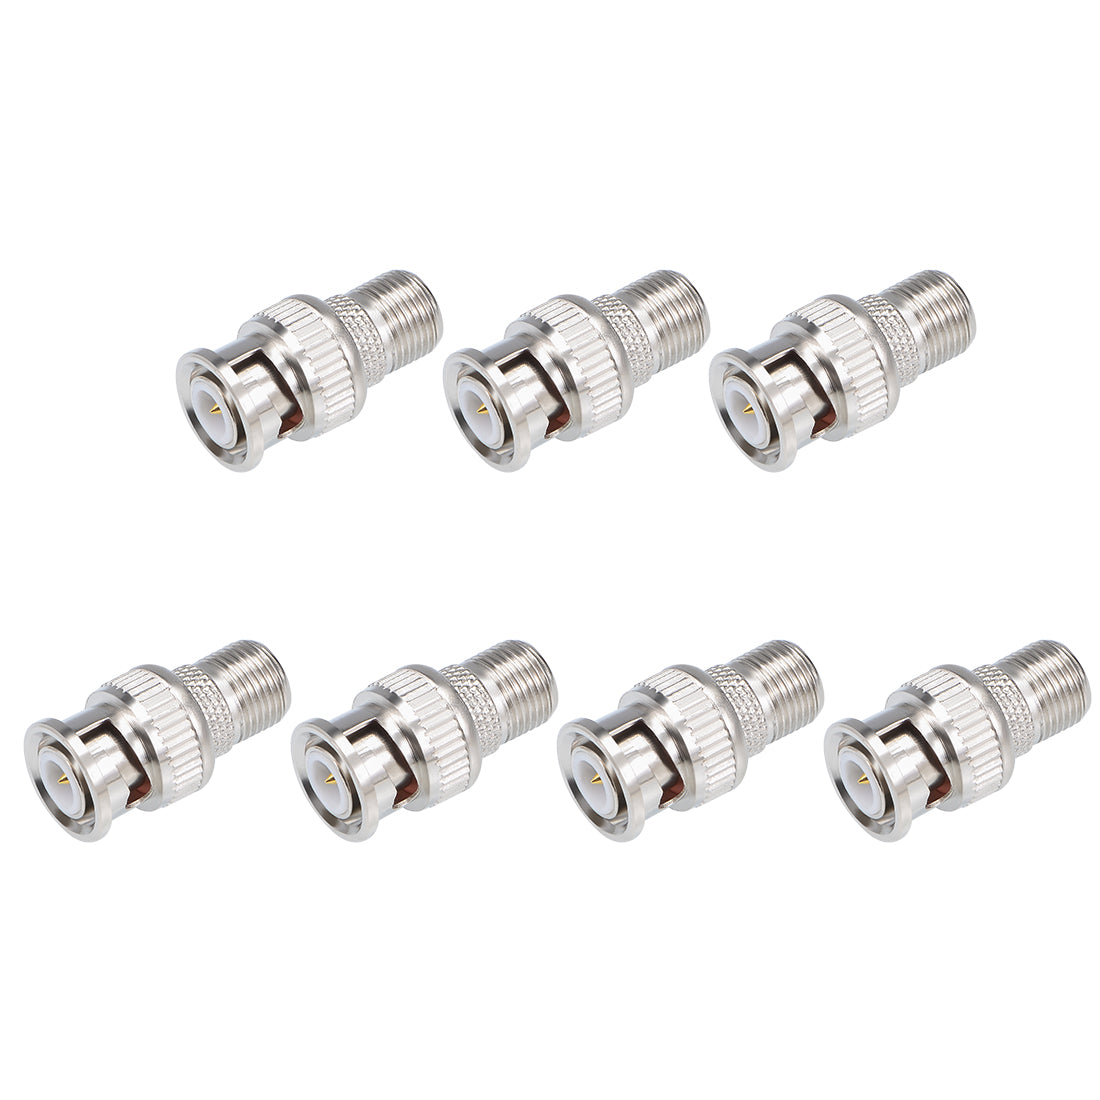 uxcell Uxcell 7pcs Alloy BNC Male to BSP F Female Jack RF Coaxial Adapter Connector Video